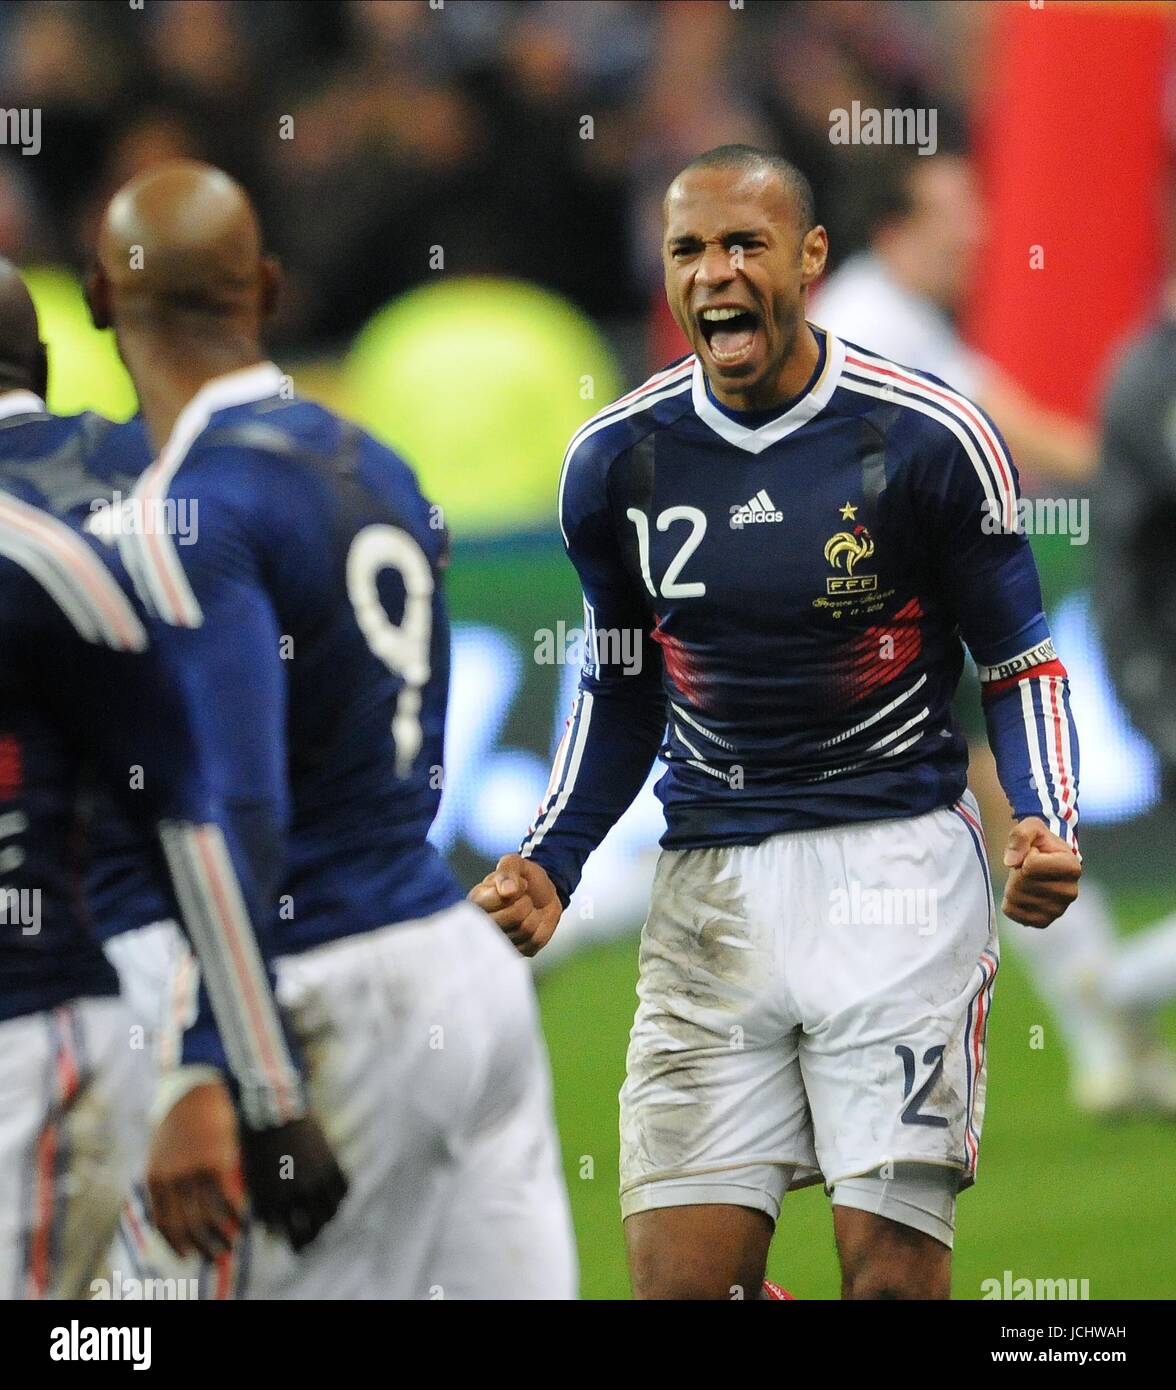 THIERRY HENRY FRANCE FRANCE V REPUBLIC OF IRELAND STADE DE FRANCE, PARIS, FRANCE 18 November 2009 GAB4011   RANCE V REPUBLIC OF IRELAND WORLD CUP QUALIFIER 2ND LEG     WARNING! This Photograph May Only Be Used For Newspaper And/Or Magazine Editorial Purposes. May Not Be Used For Publications Involving 1 player, 1 Club Or 1 Competition  Without Written Authorisation From Football DataCo Ltd. For Any Queries, Please Contact Football DataCo Ltd on +44 (0) 207 864 9121 Stock Photo